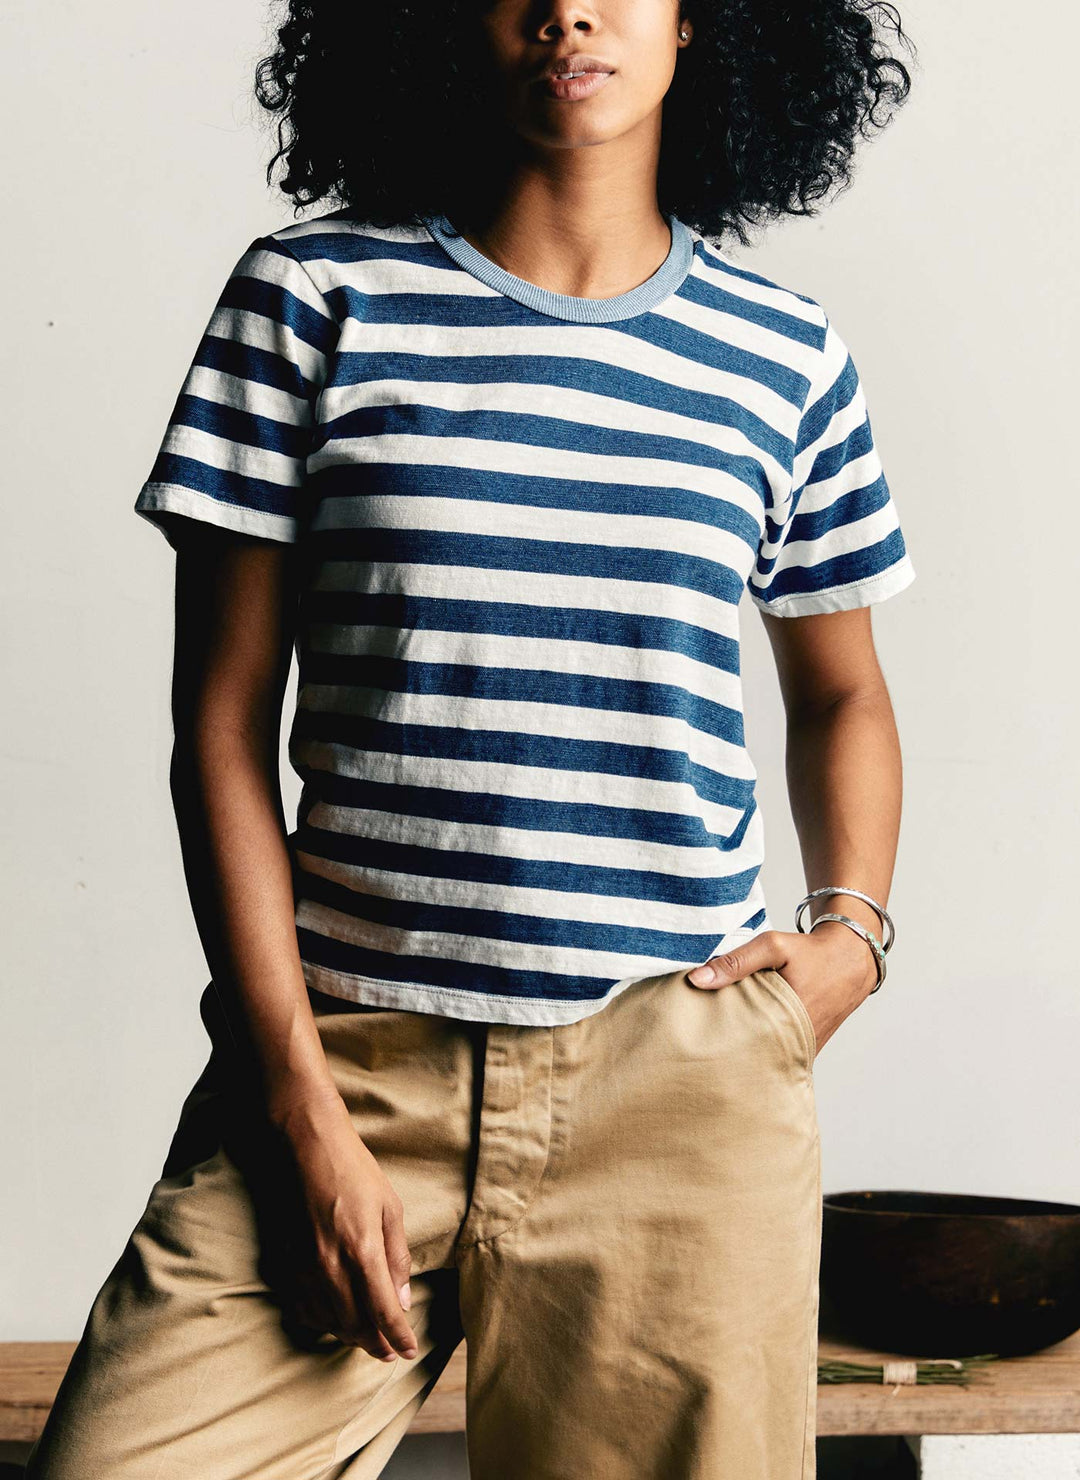 a woman with curly hair wearing a striped shirt and khaki pants